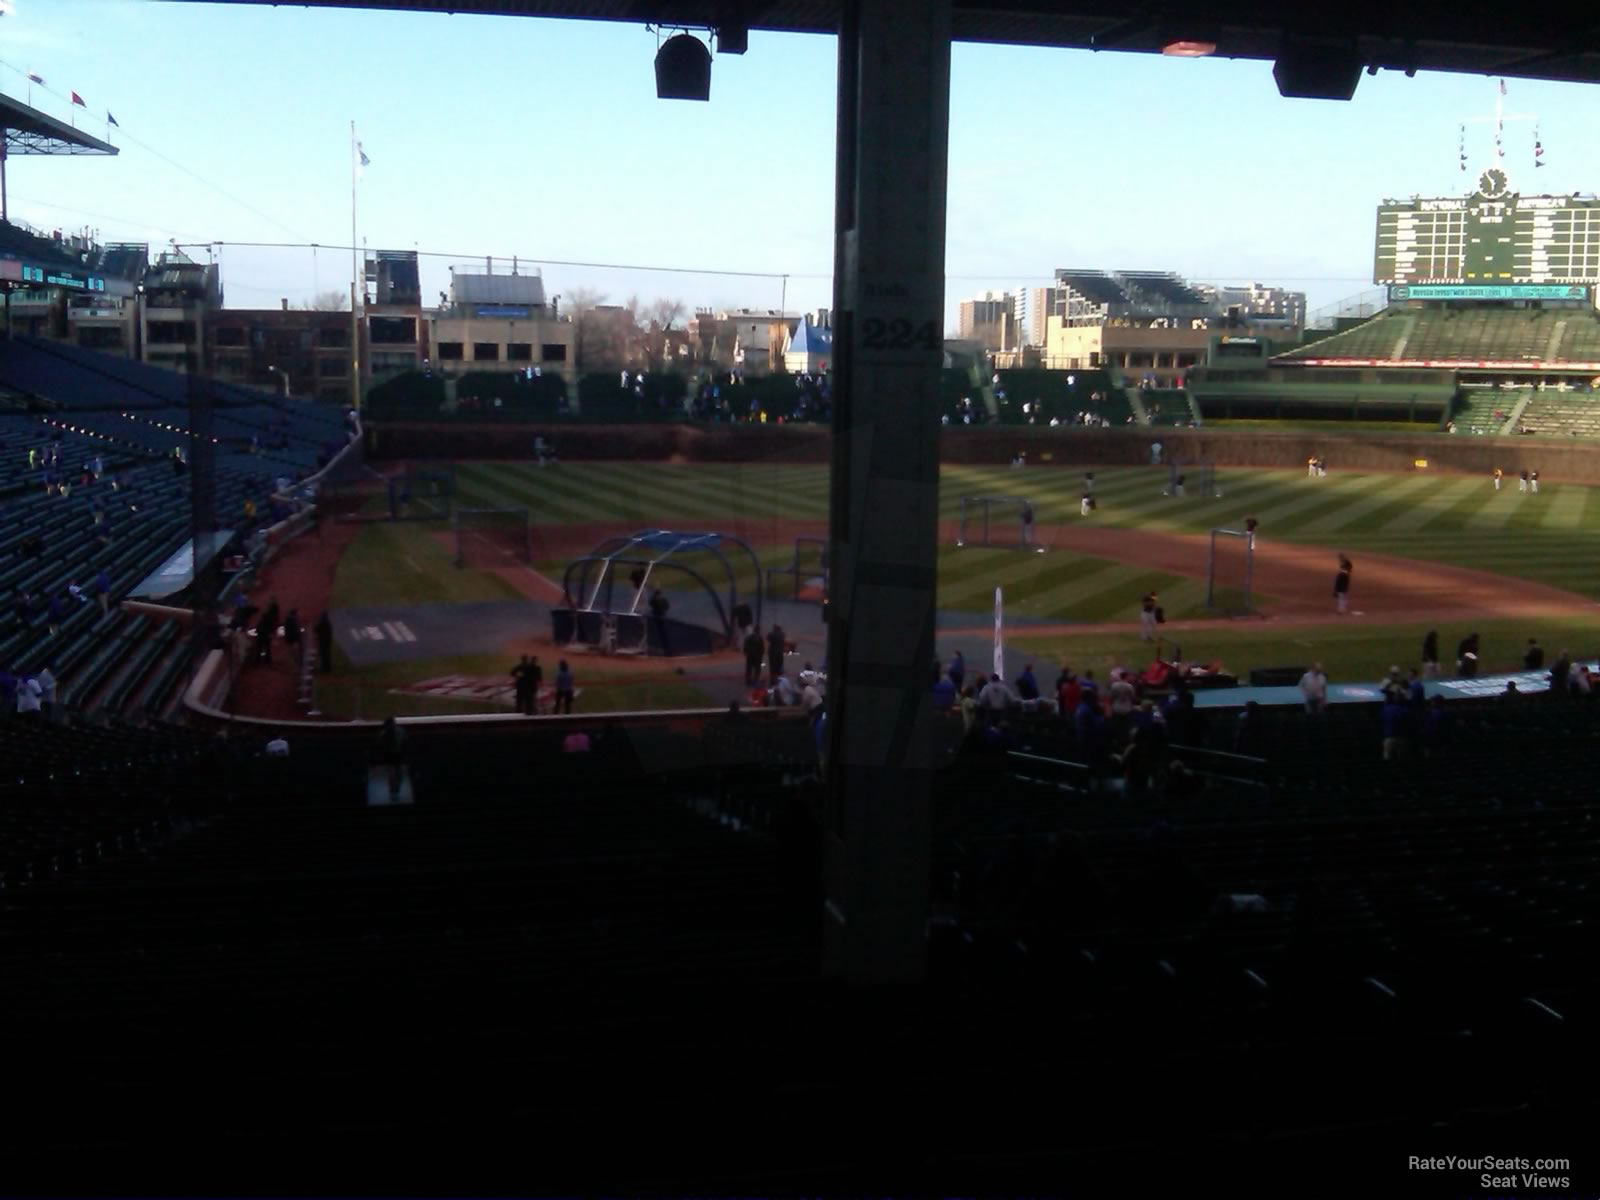 Your seat at Wrigley Field isn't changing — but its number is